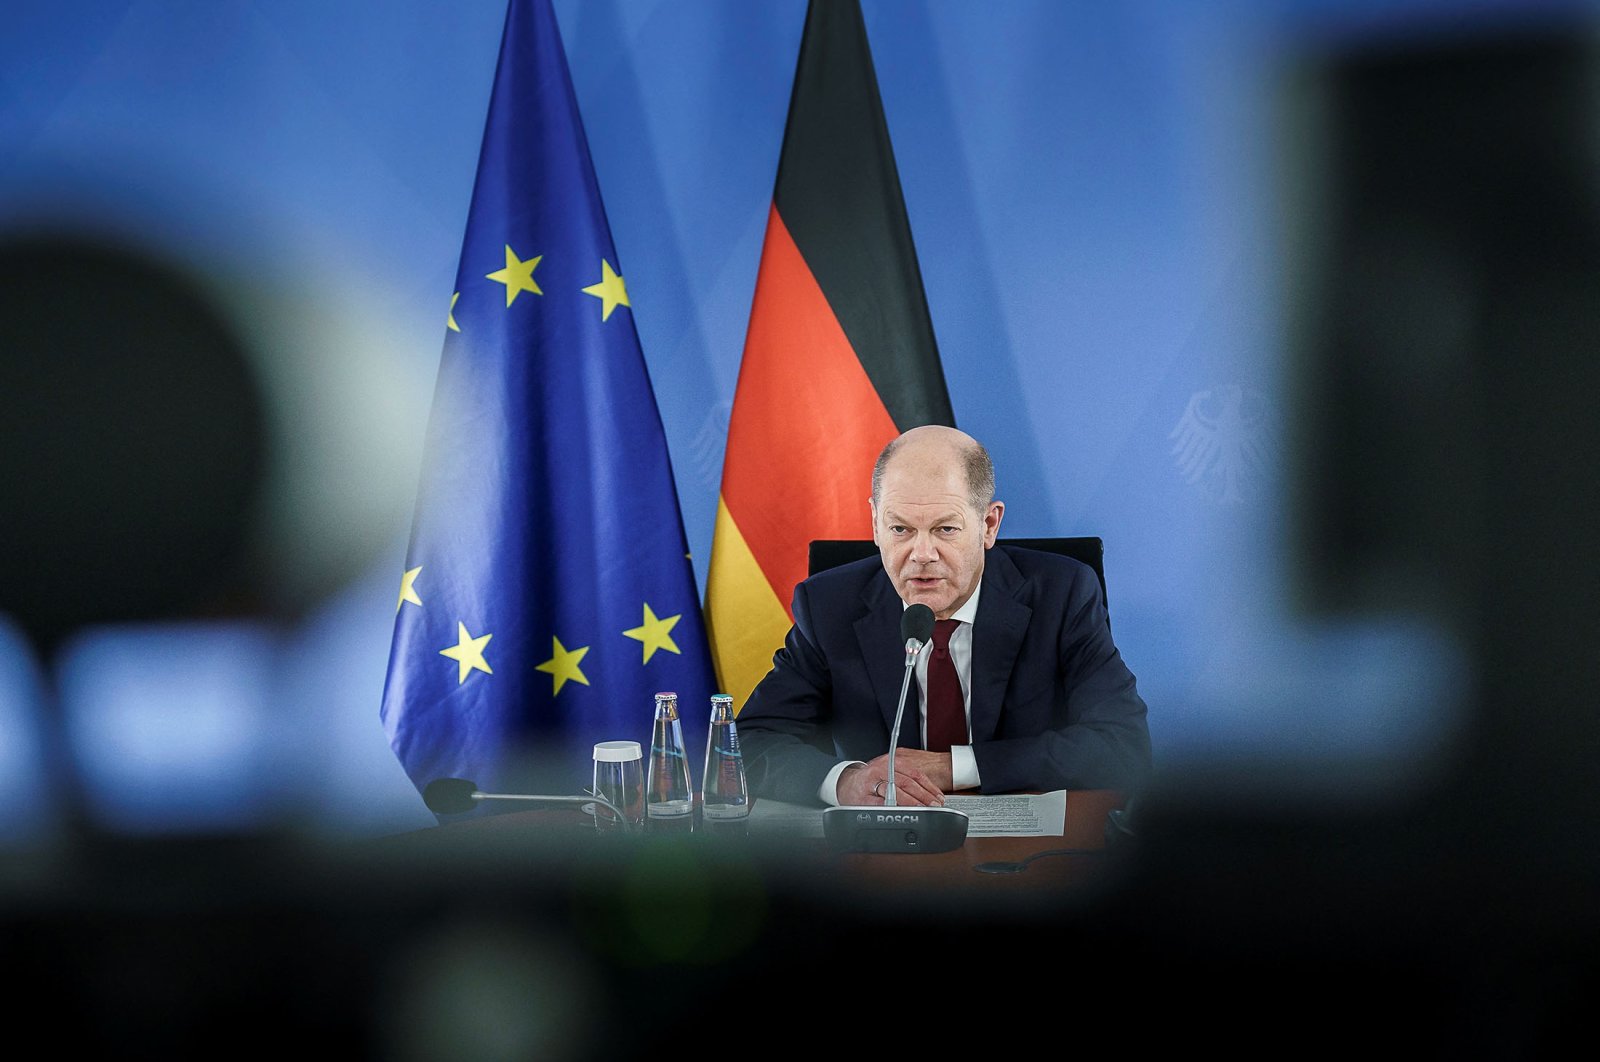 German Chancellor Olaf Scholz in a video conference with U.S. President Joe Biden and European leaders speaking about Russia and Ukraine from the chancellery in Berlin, Germany, Jan. 24, 2022. (Reuters Photo)